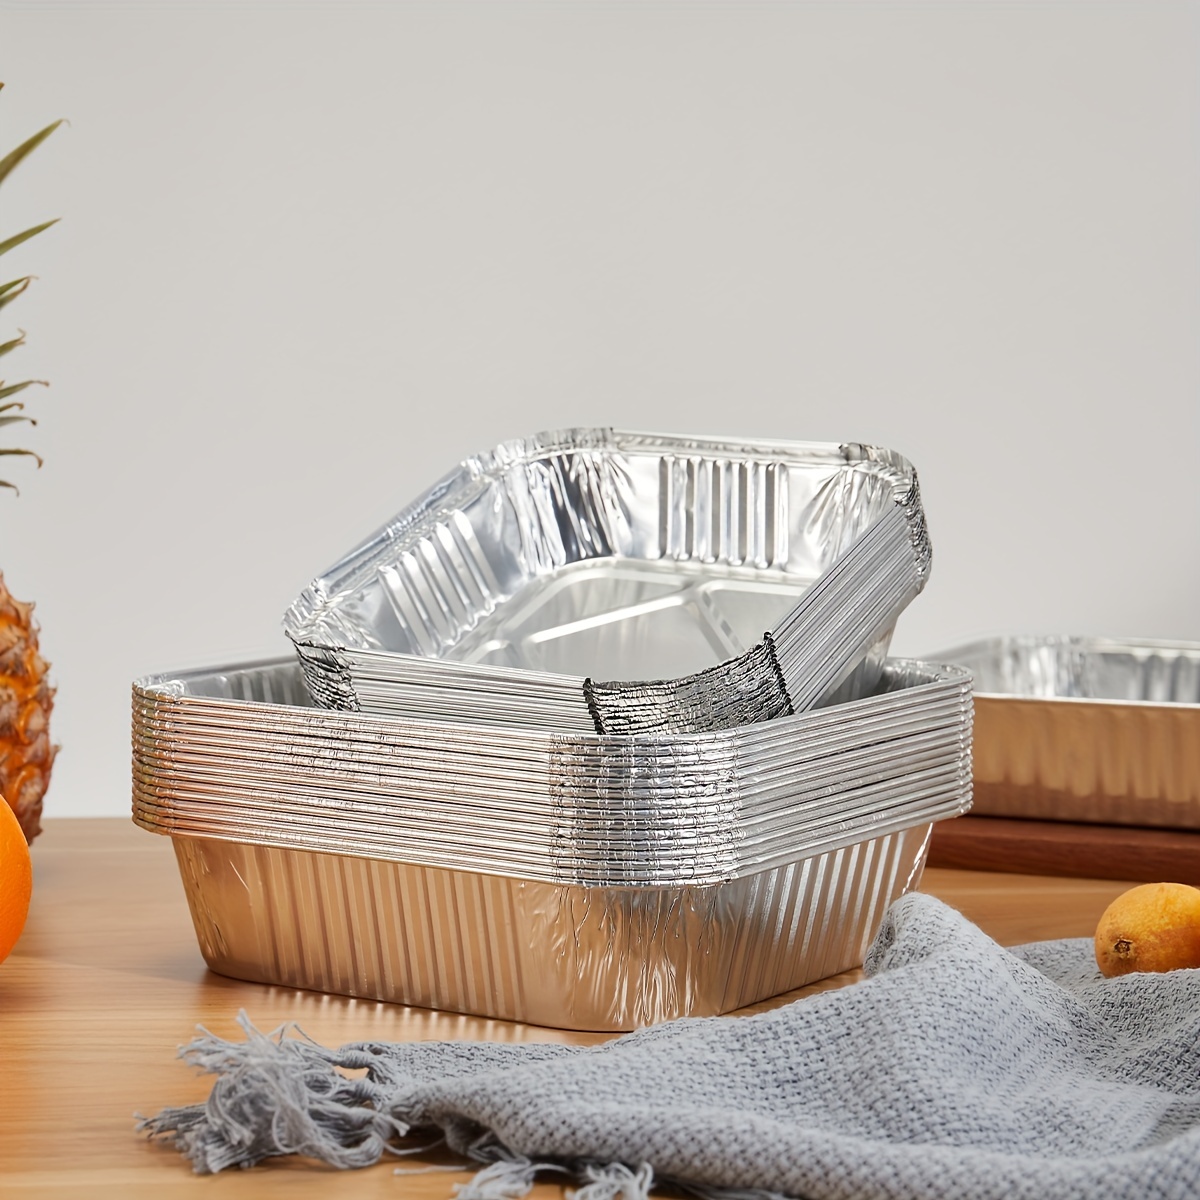 PLASTICPRO Disposable 2 LB Aluminum Takeout Tin Foil Baking Pans 6'' X 8''  X 2'' Inch Bakeware - Cookware Perfect for Baking Cakes,Brownies,Bread